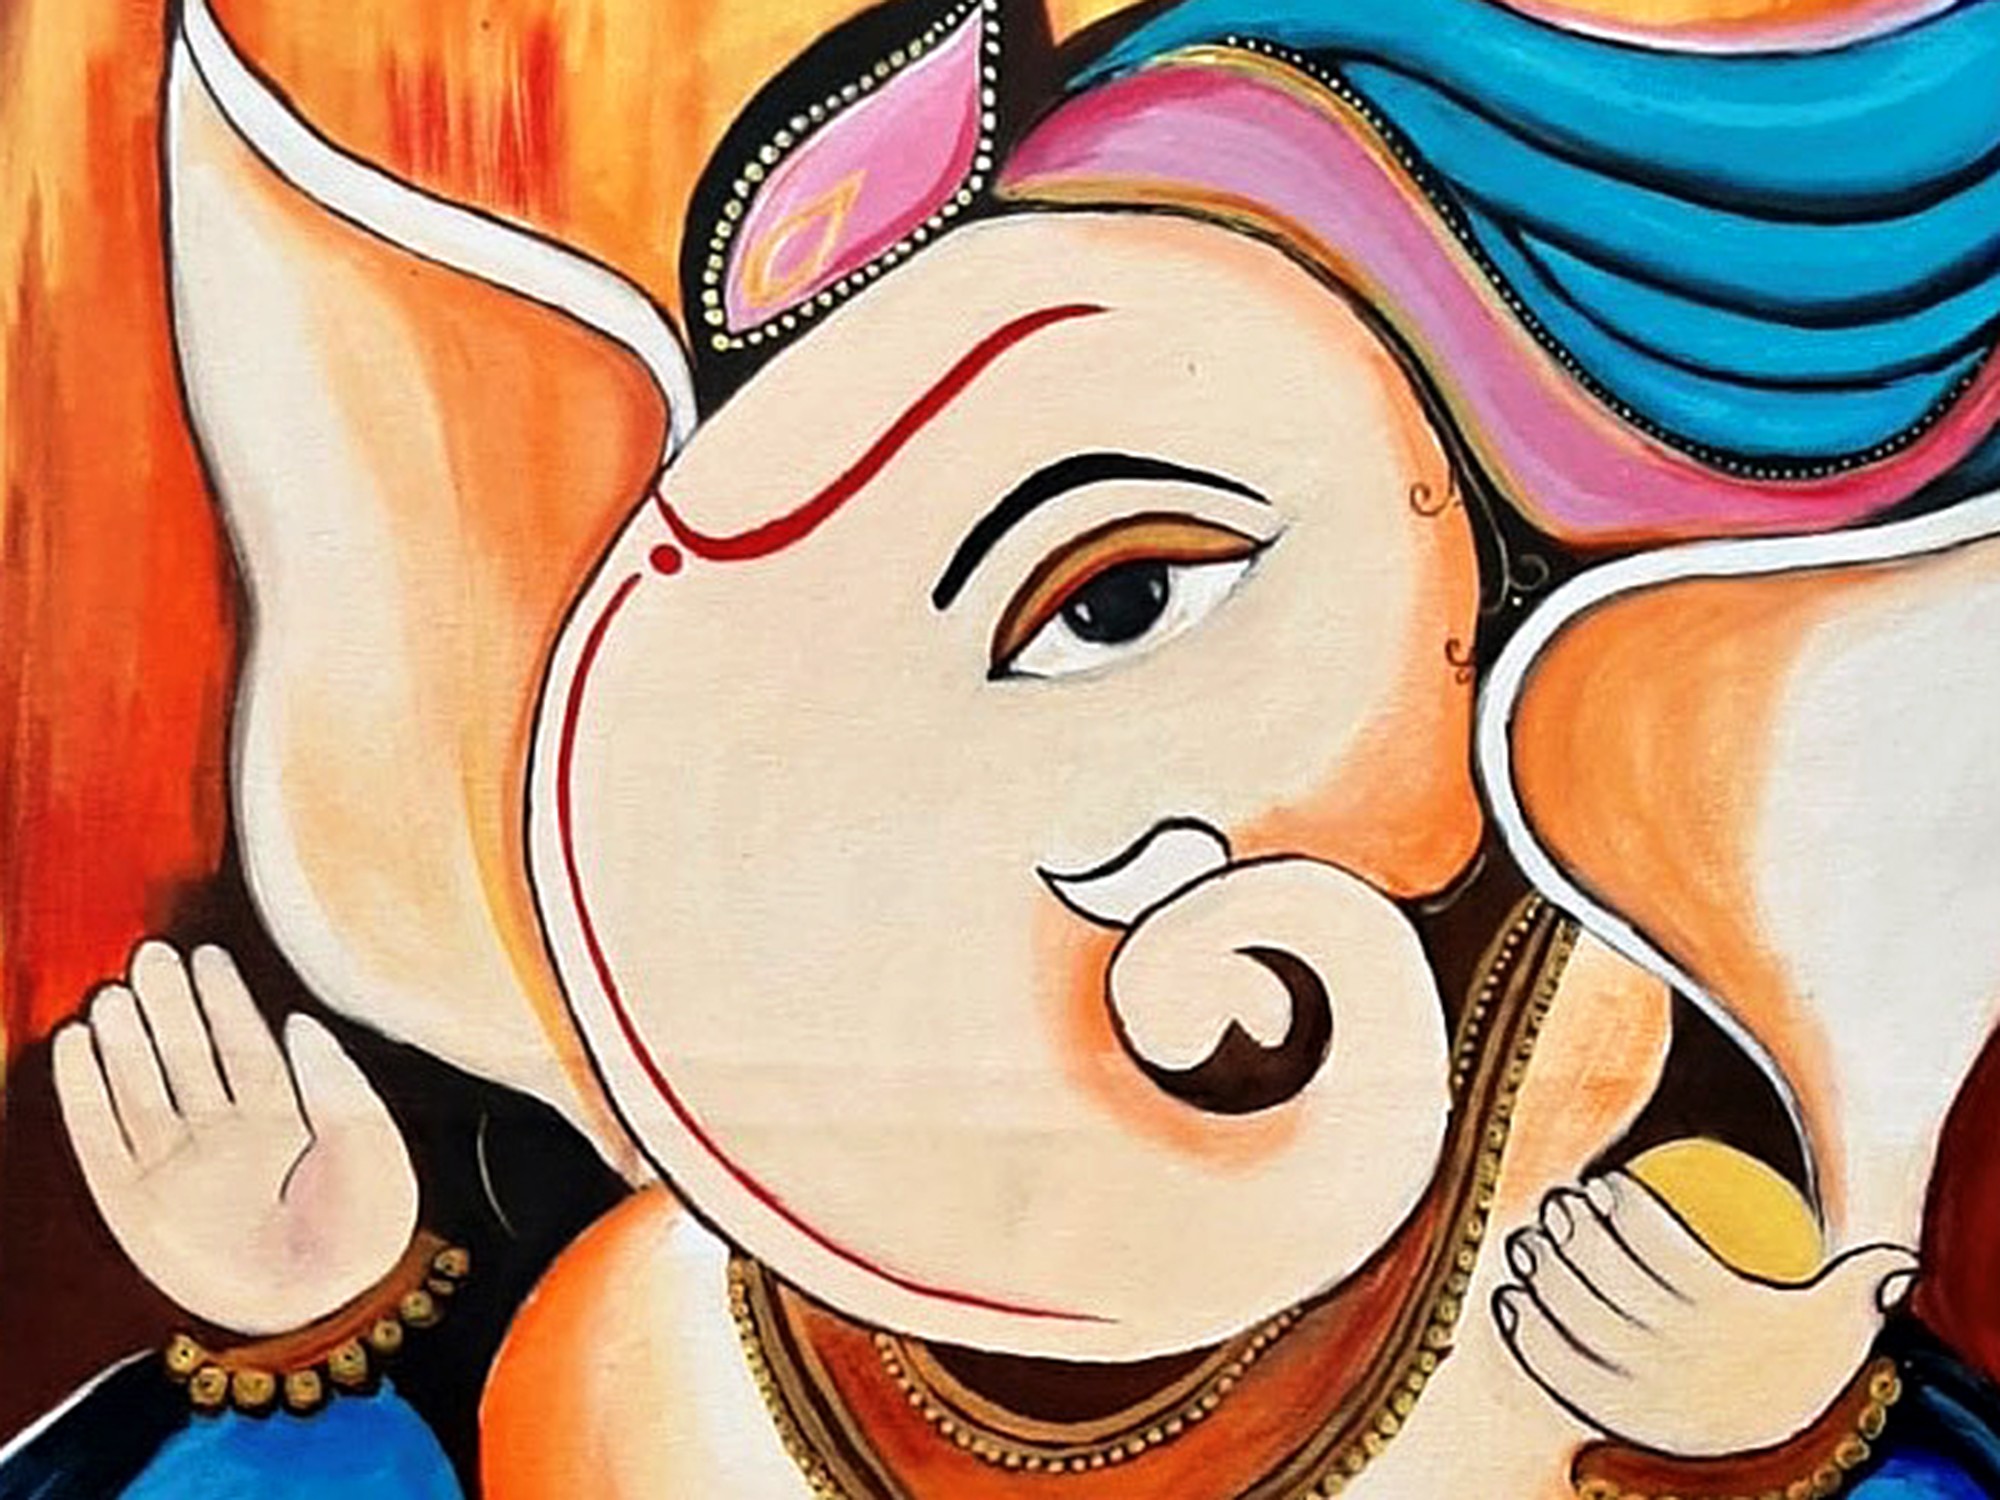 Indianara Lord Ganesha Painting (4332BK) -Synthetic Fame, 10 x 13 Inch  Digital Reprint 13 inch x 10.2 inch Painting Price in India - Buy Indianara  Lord Ganesha Painting (4332BK) -Synthetic Fame, 10